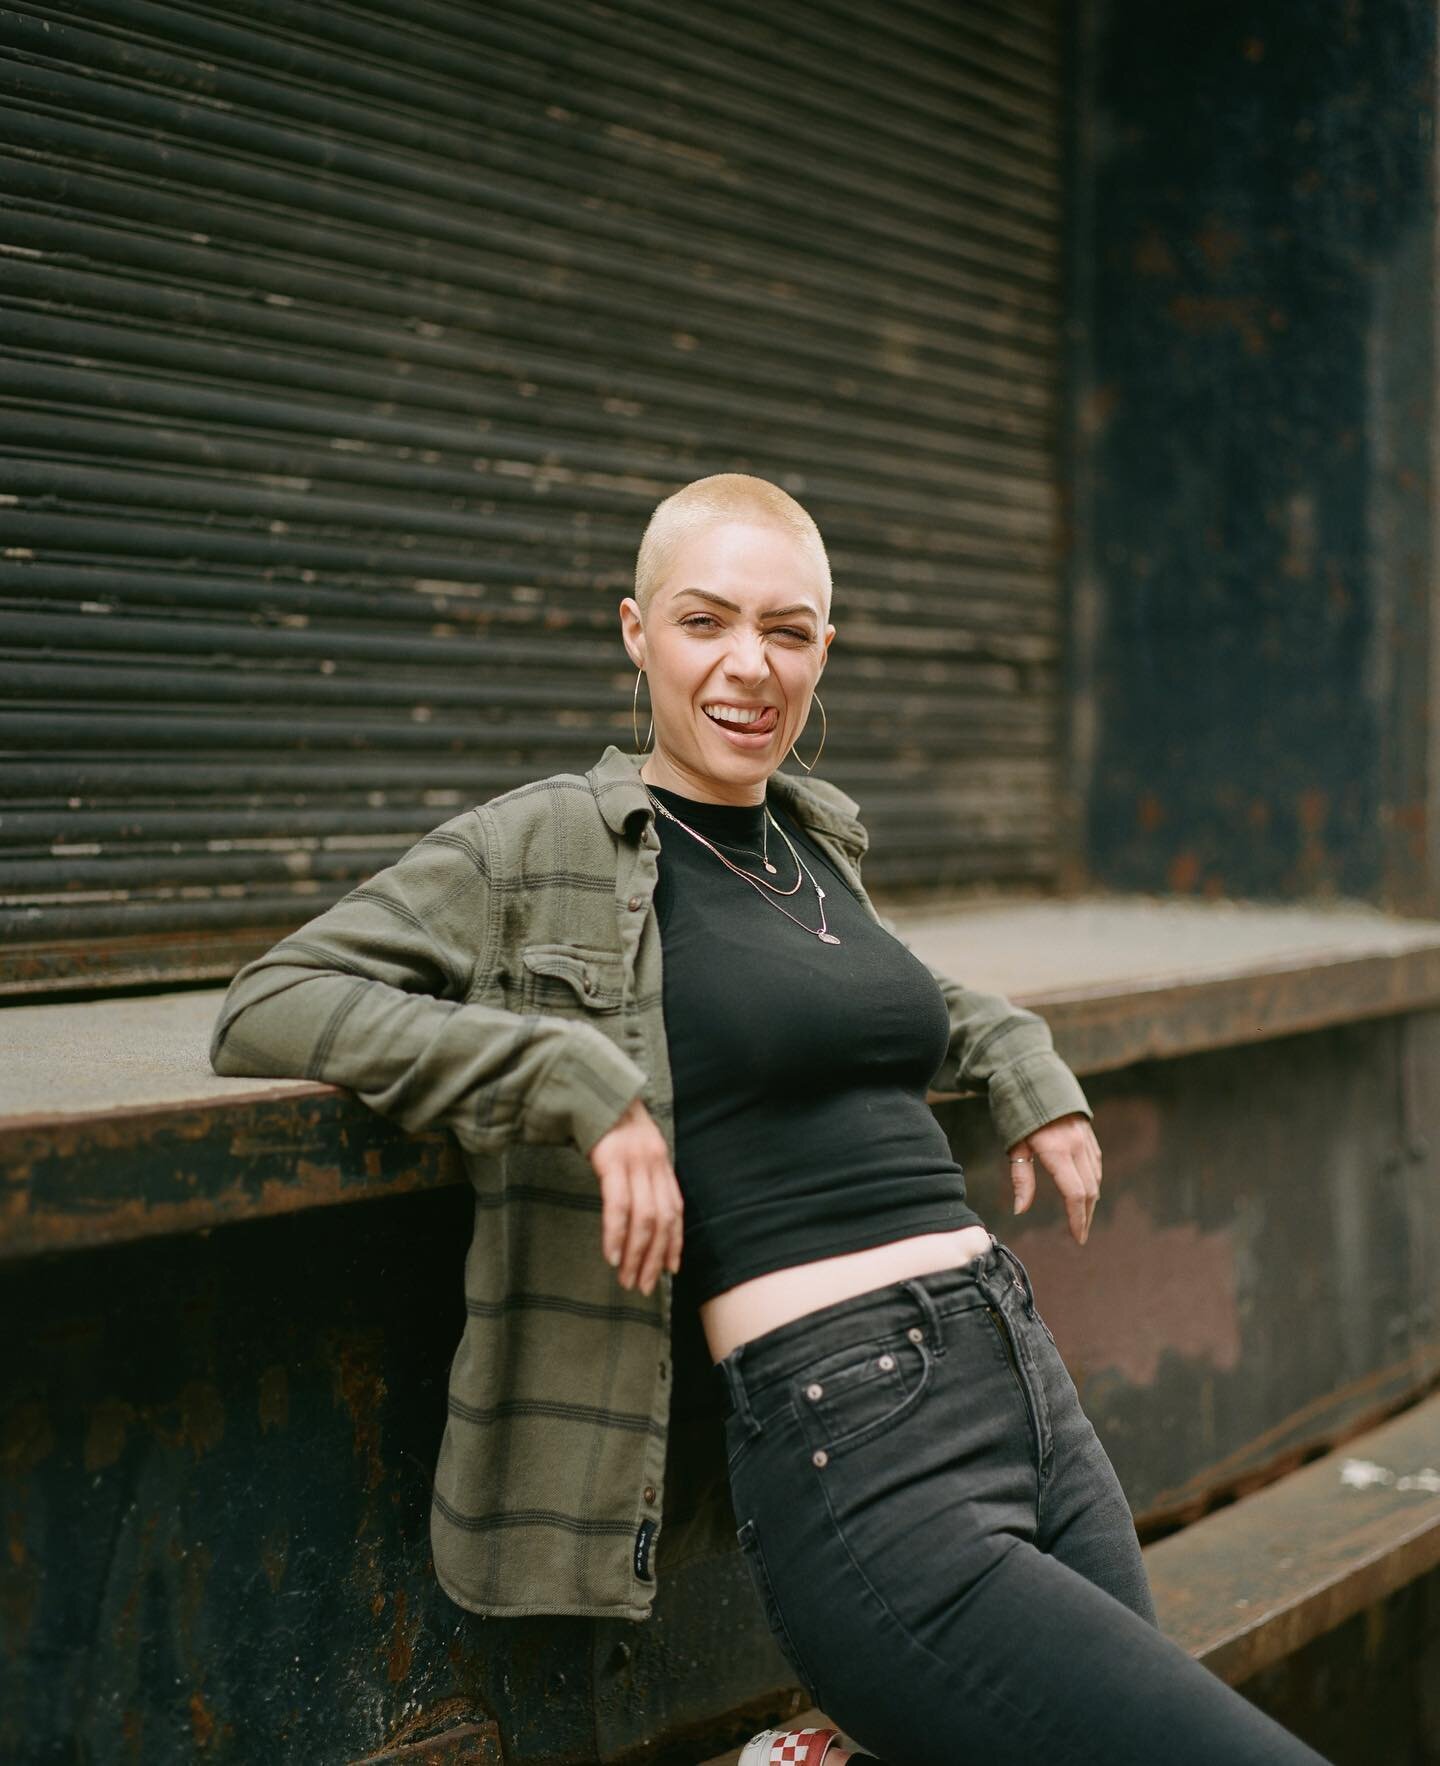 A recent portrait session I did with Nacole after this badass decided to buzz her head. It was so fun just playing. Shooting with the Pentax 67 on 120 film is just a dream.

Always looking to create. I have been wanting to build a curated look on IG 